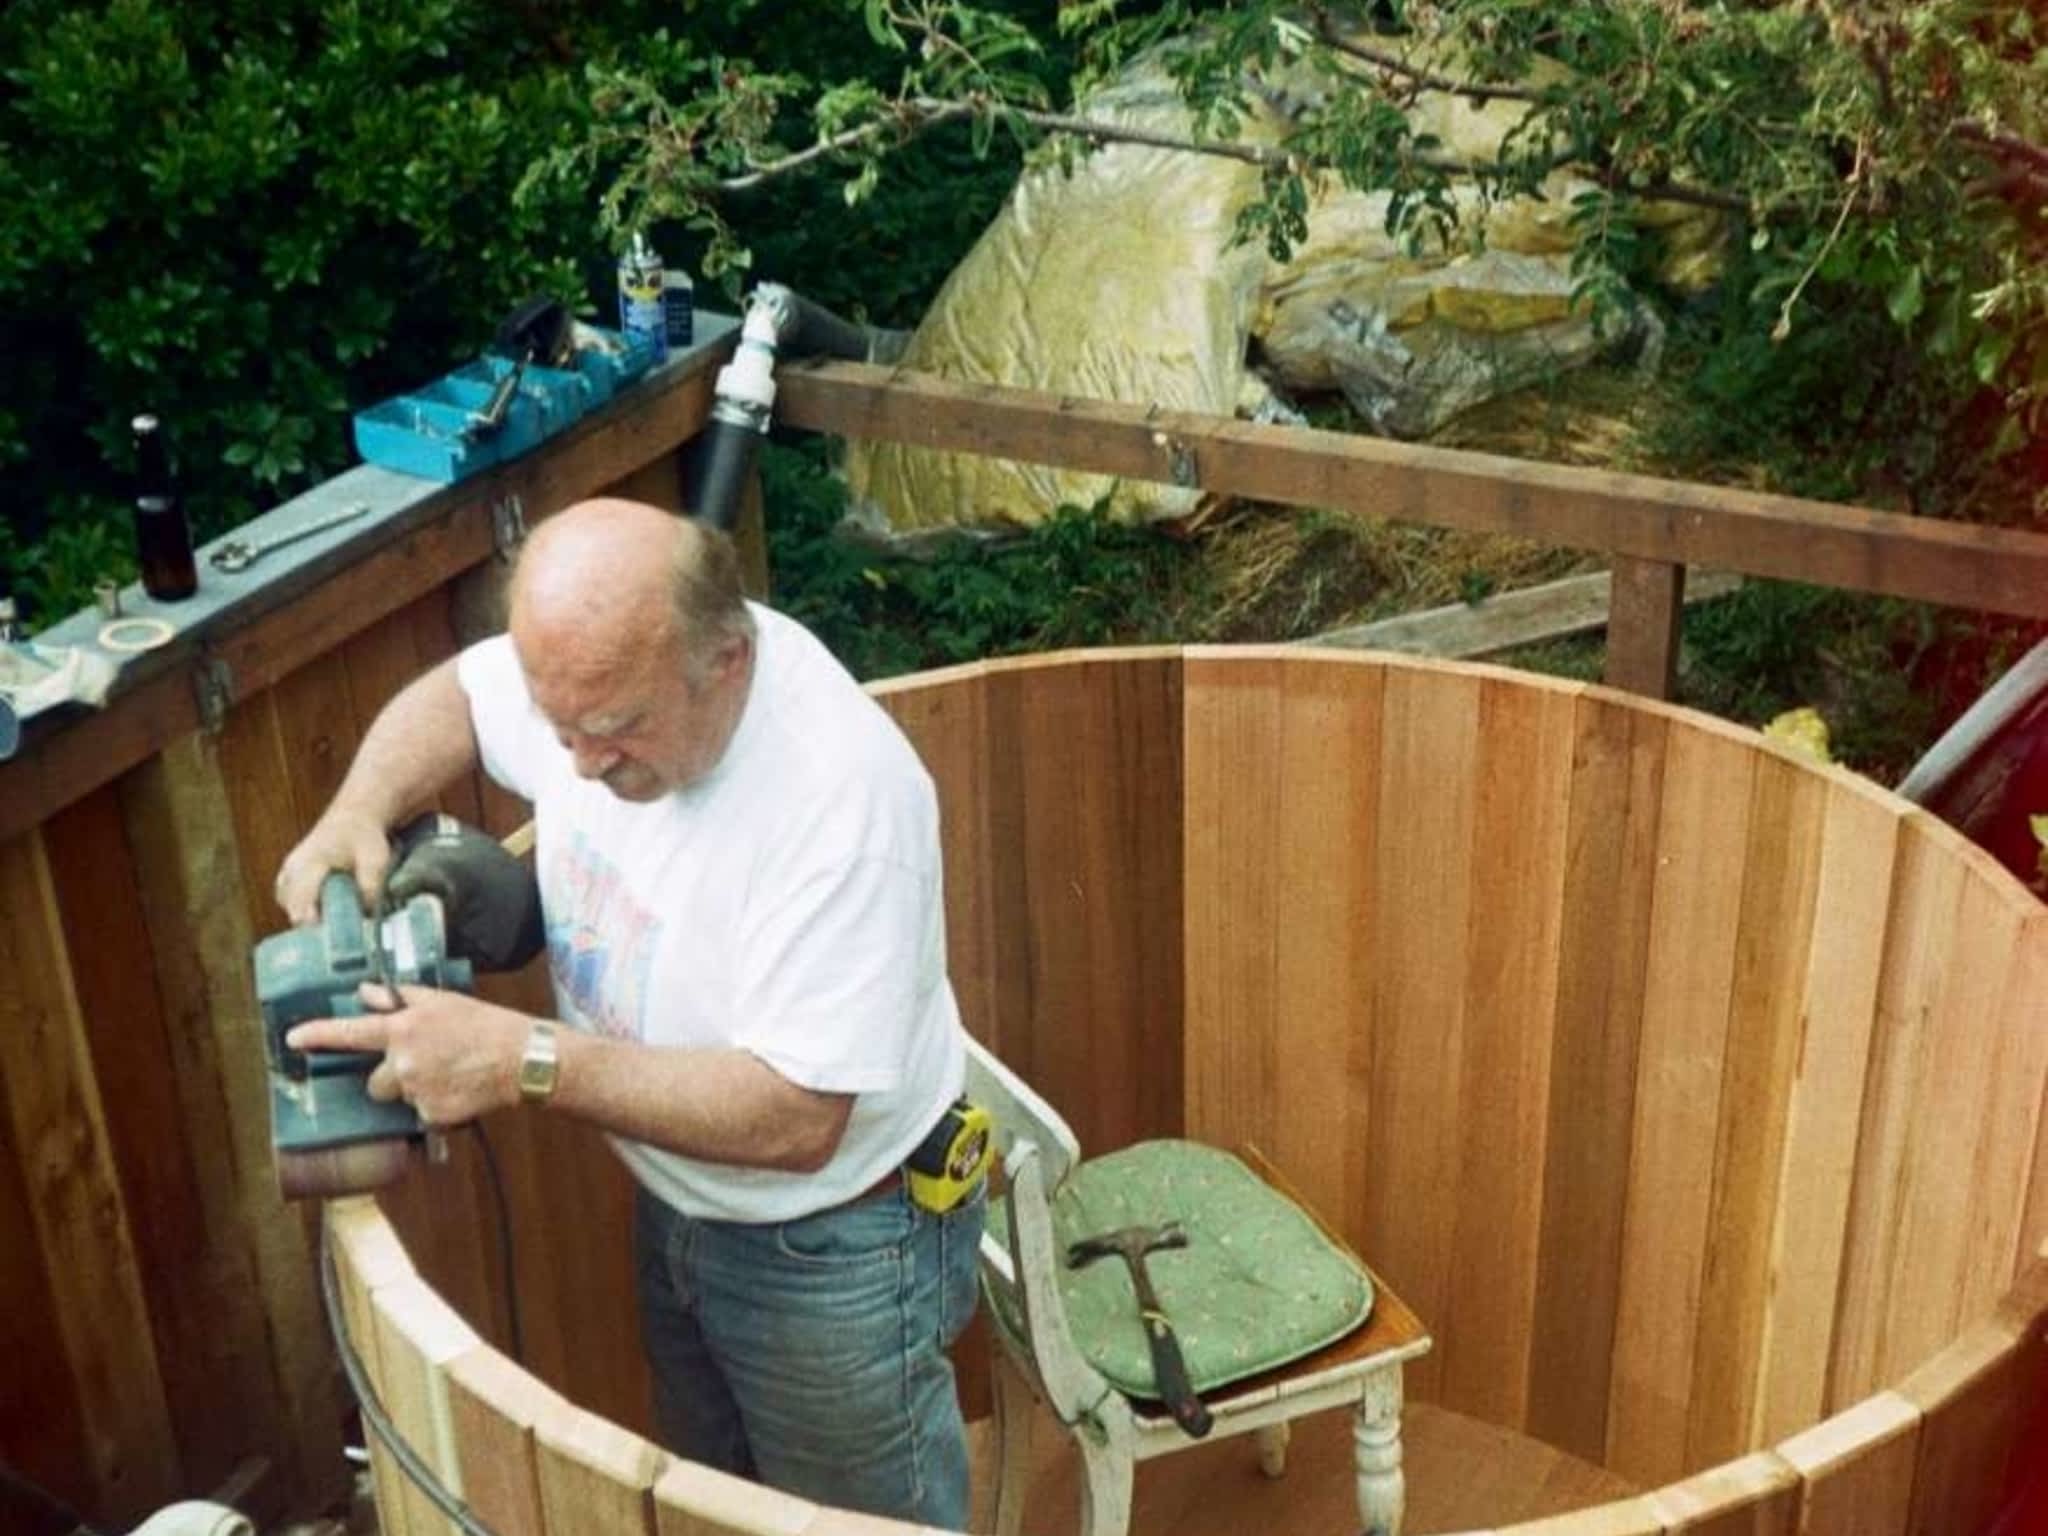 photo H K Ideal Contracting Ltd Western Red Cedar Hot Tubs